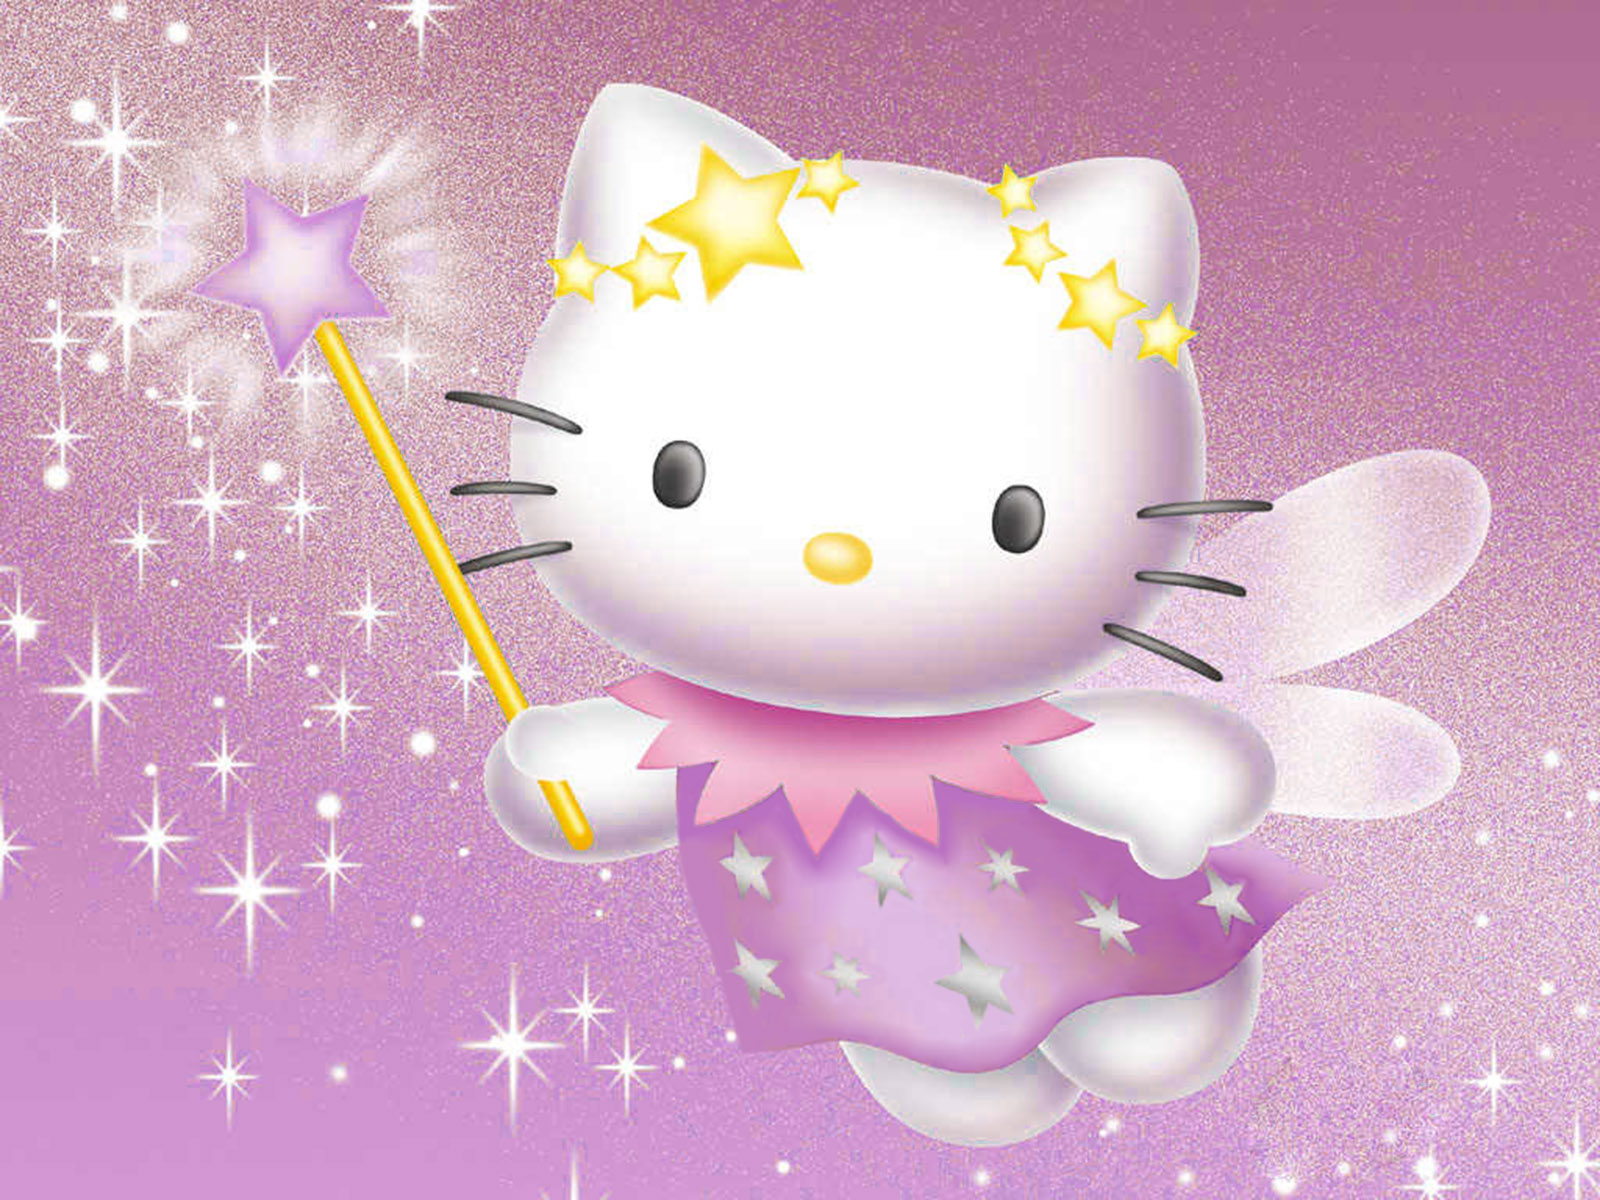 Cartoons Hello Kitty Wallpaper High Quality Background Pictures